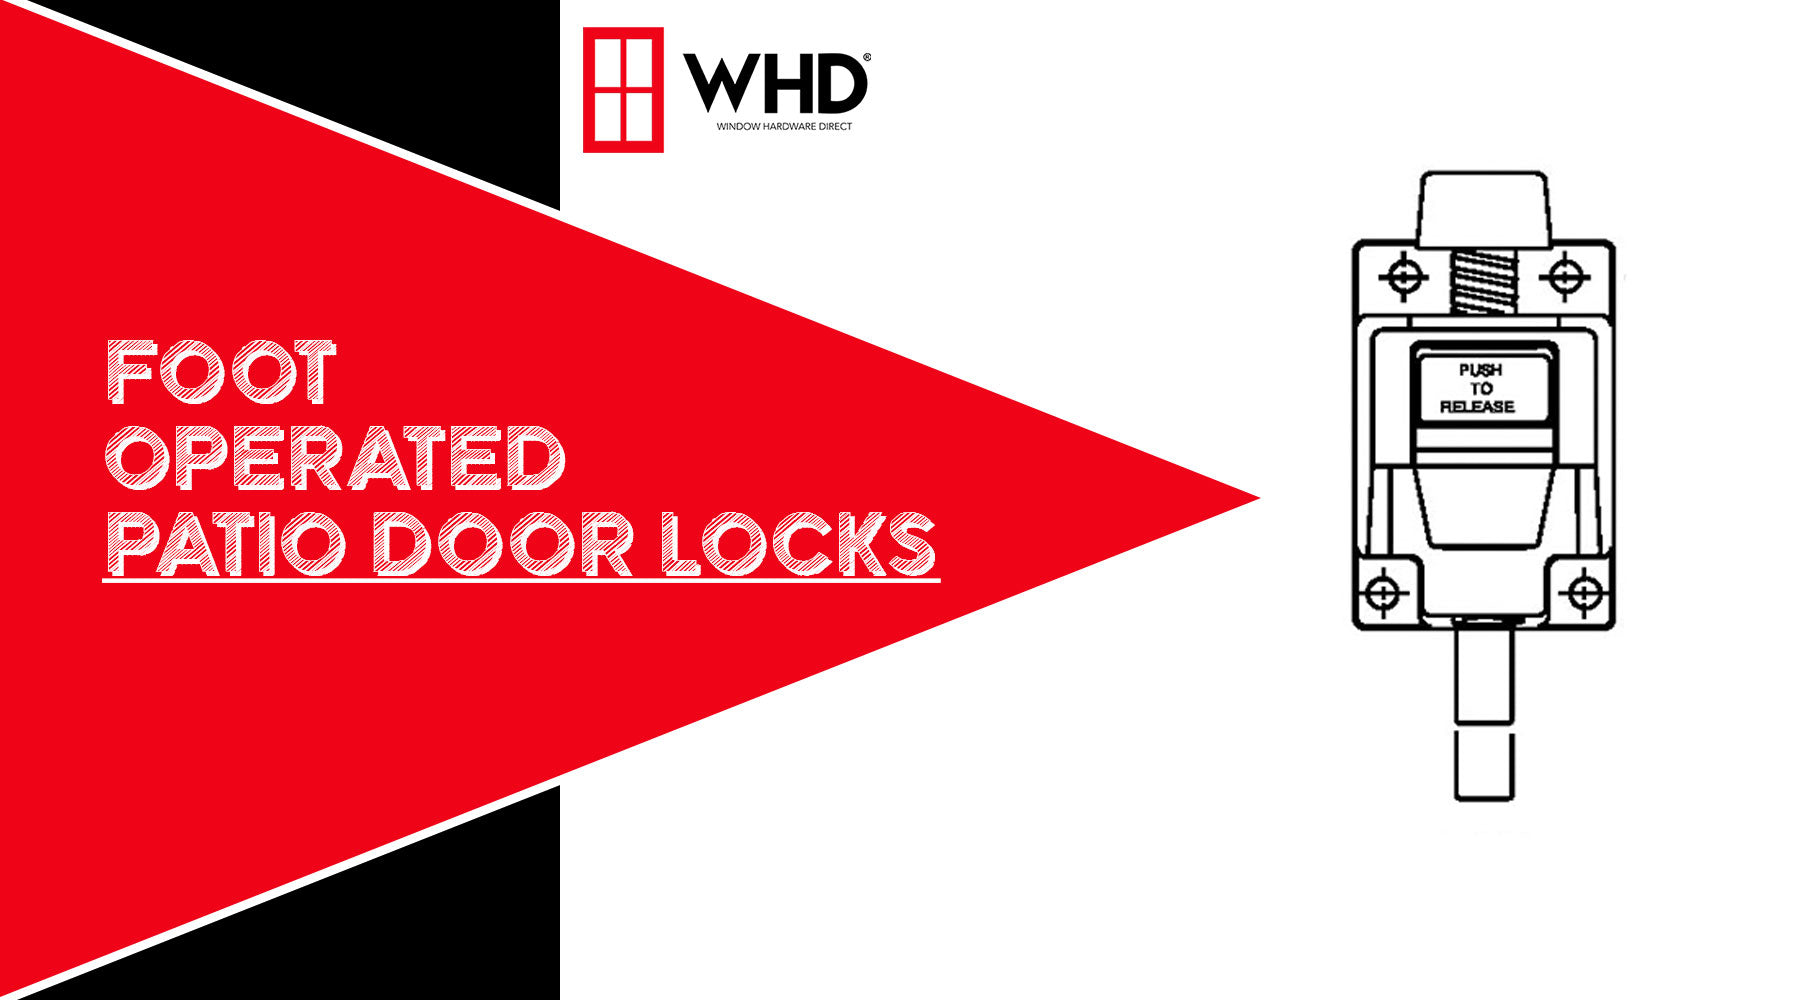 Enhancing Home Security: The Foot-Operated Door Lock Solution